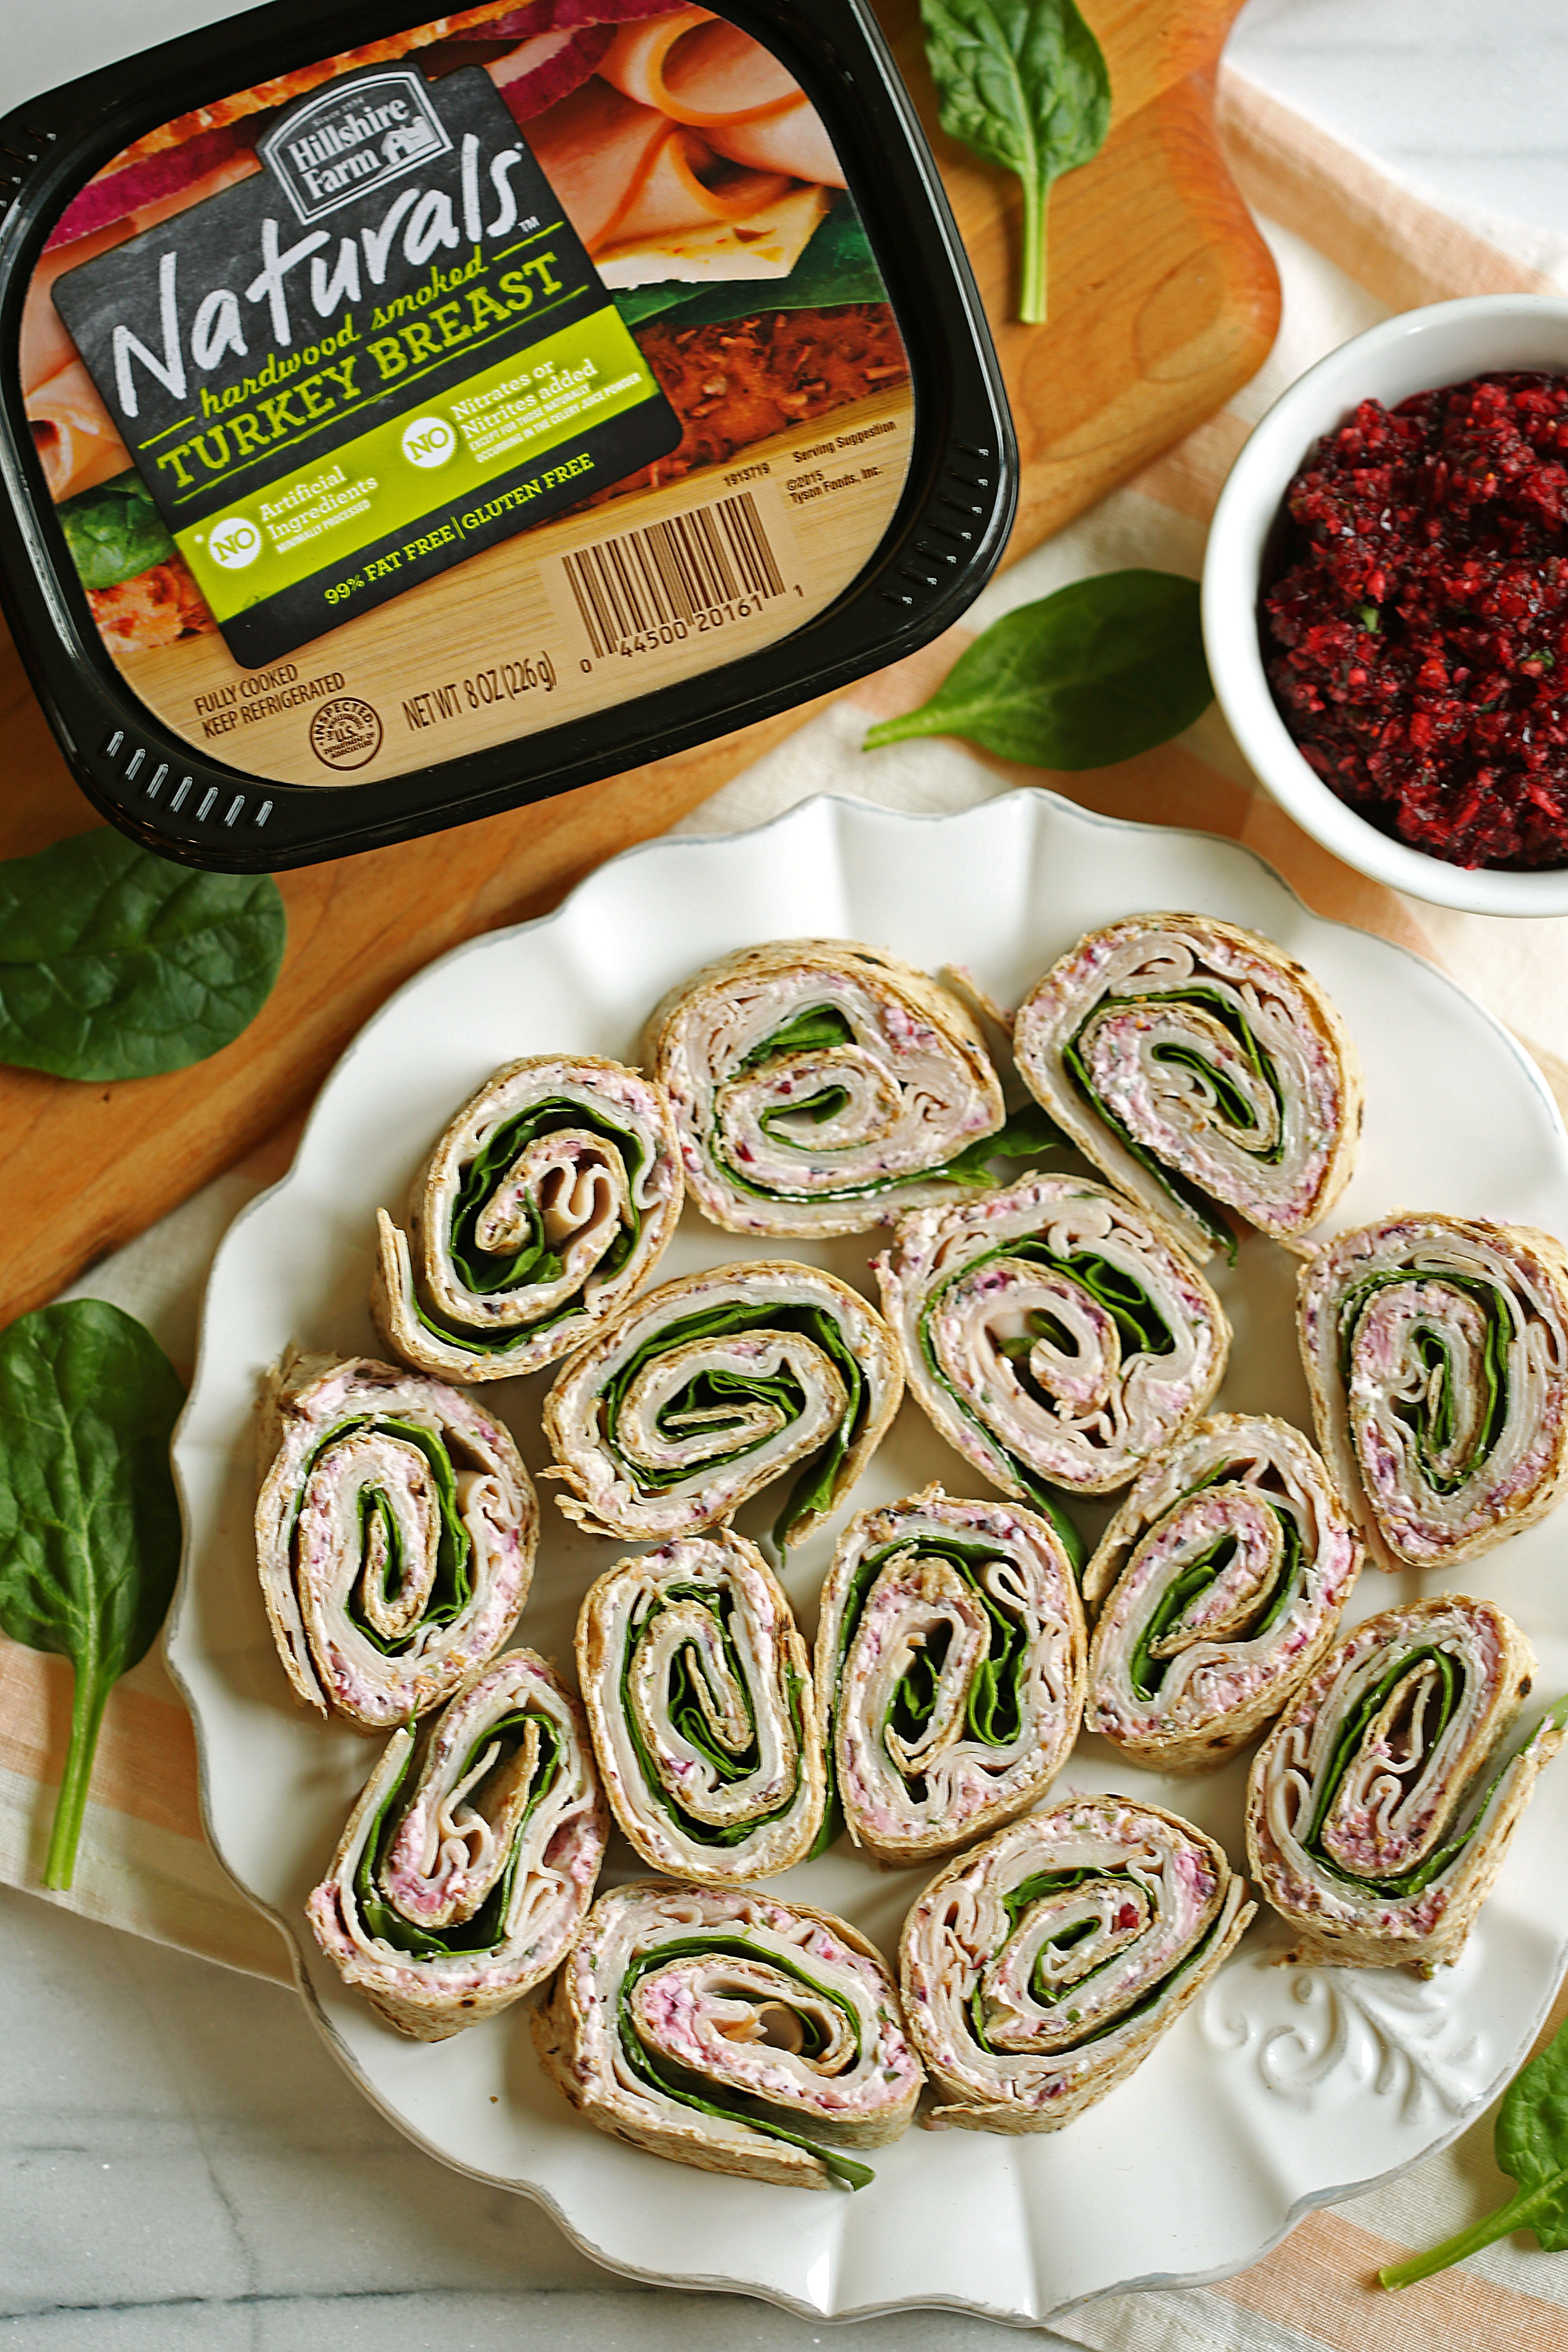 Healthy Turkey Pinwheels with Cranberry Spread | Eat Yourself Skinny